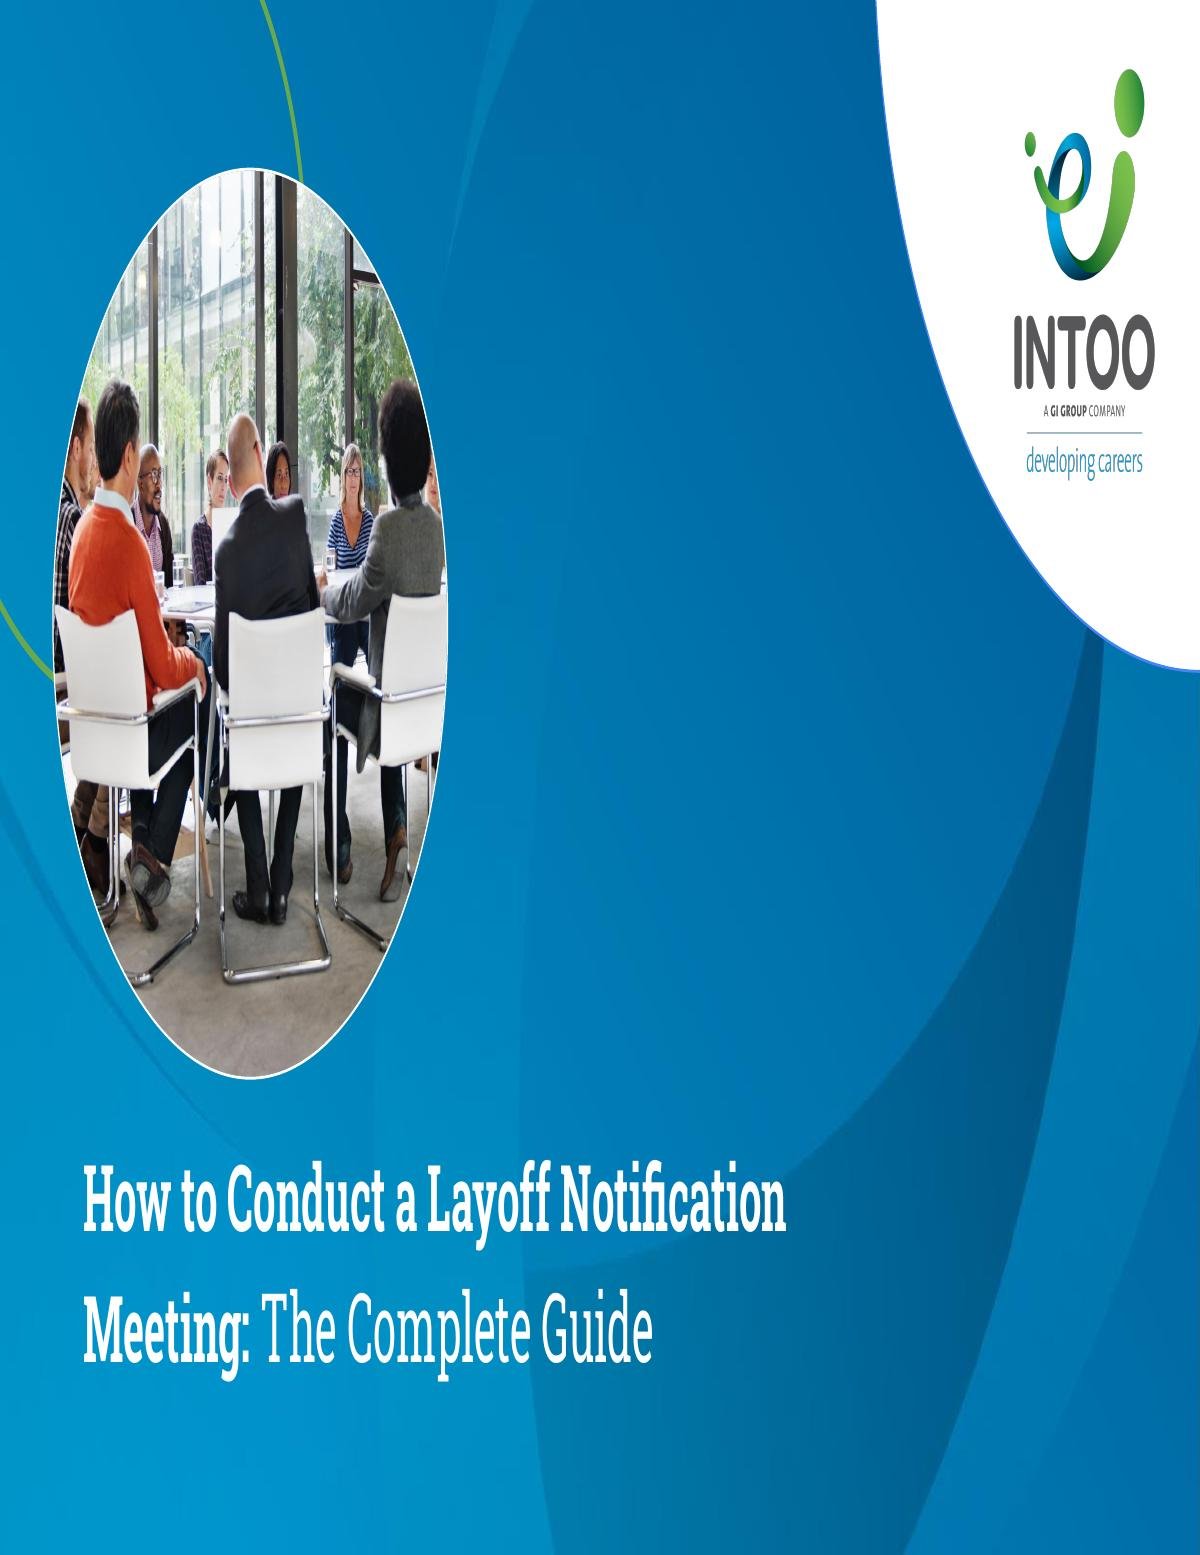 How to Conduct a Layoff Notification Meeting: The Complete Guide